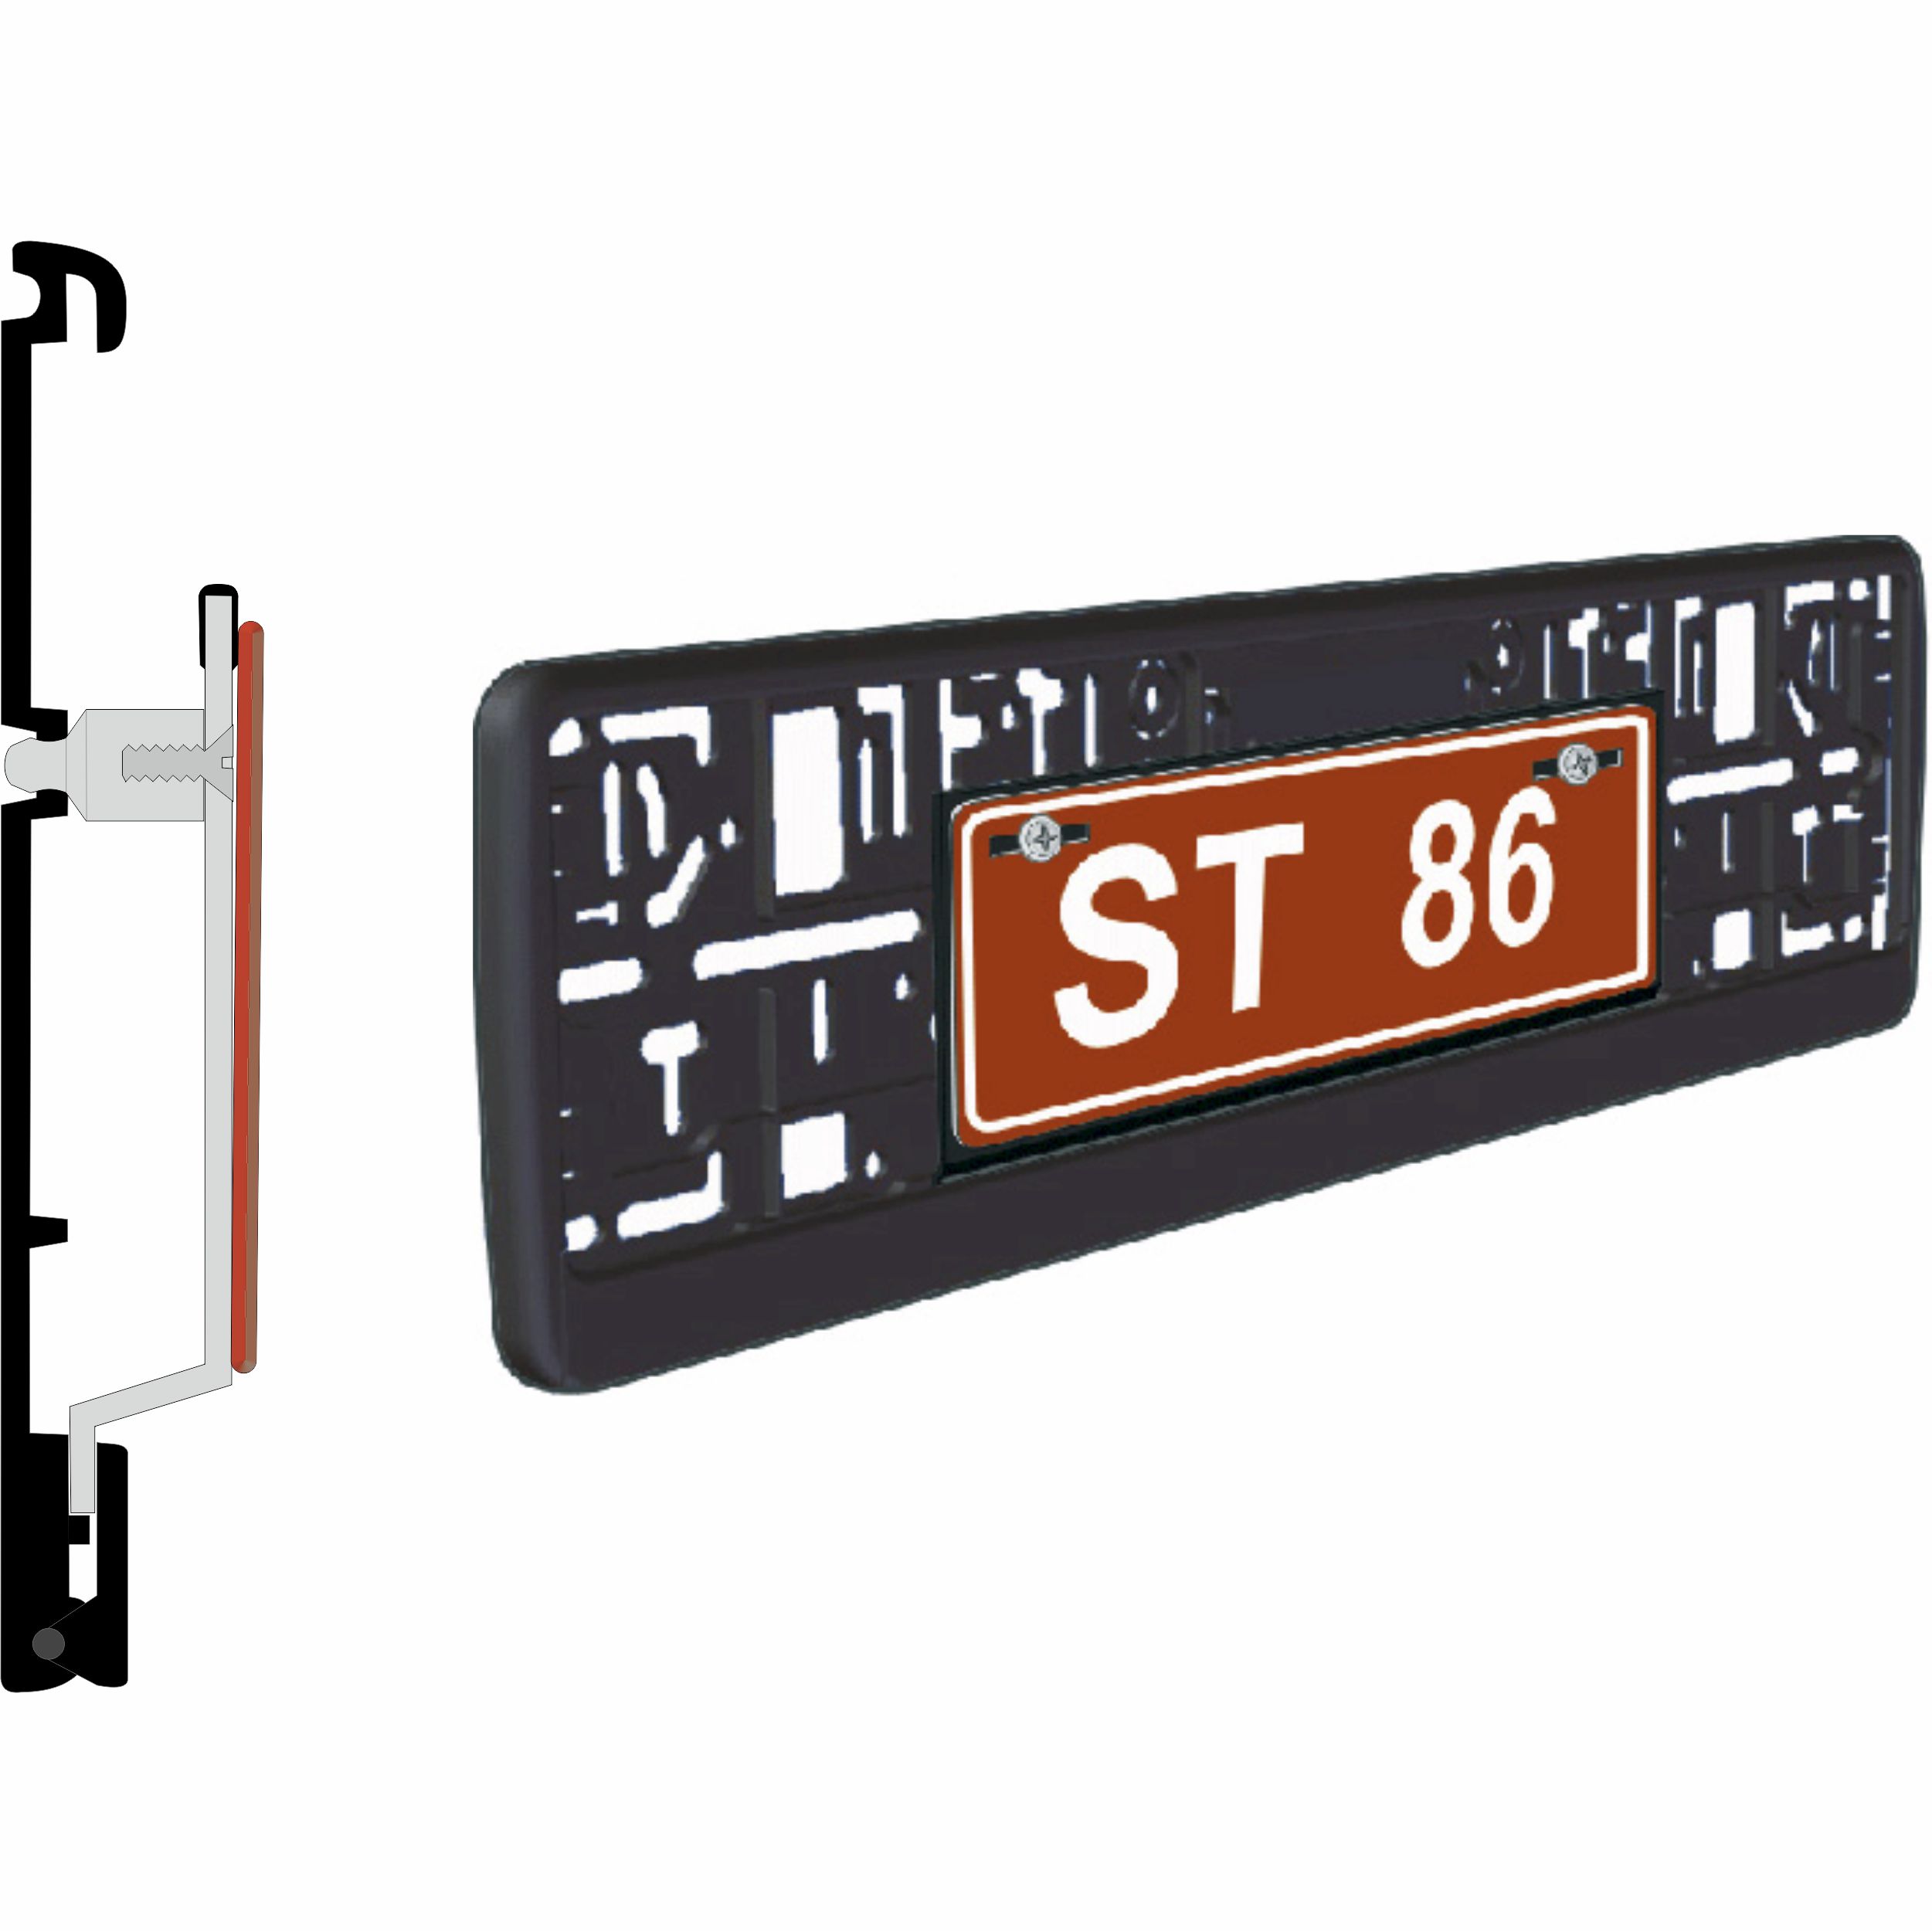 Trade license plate adapter